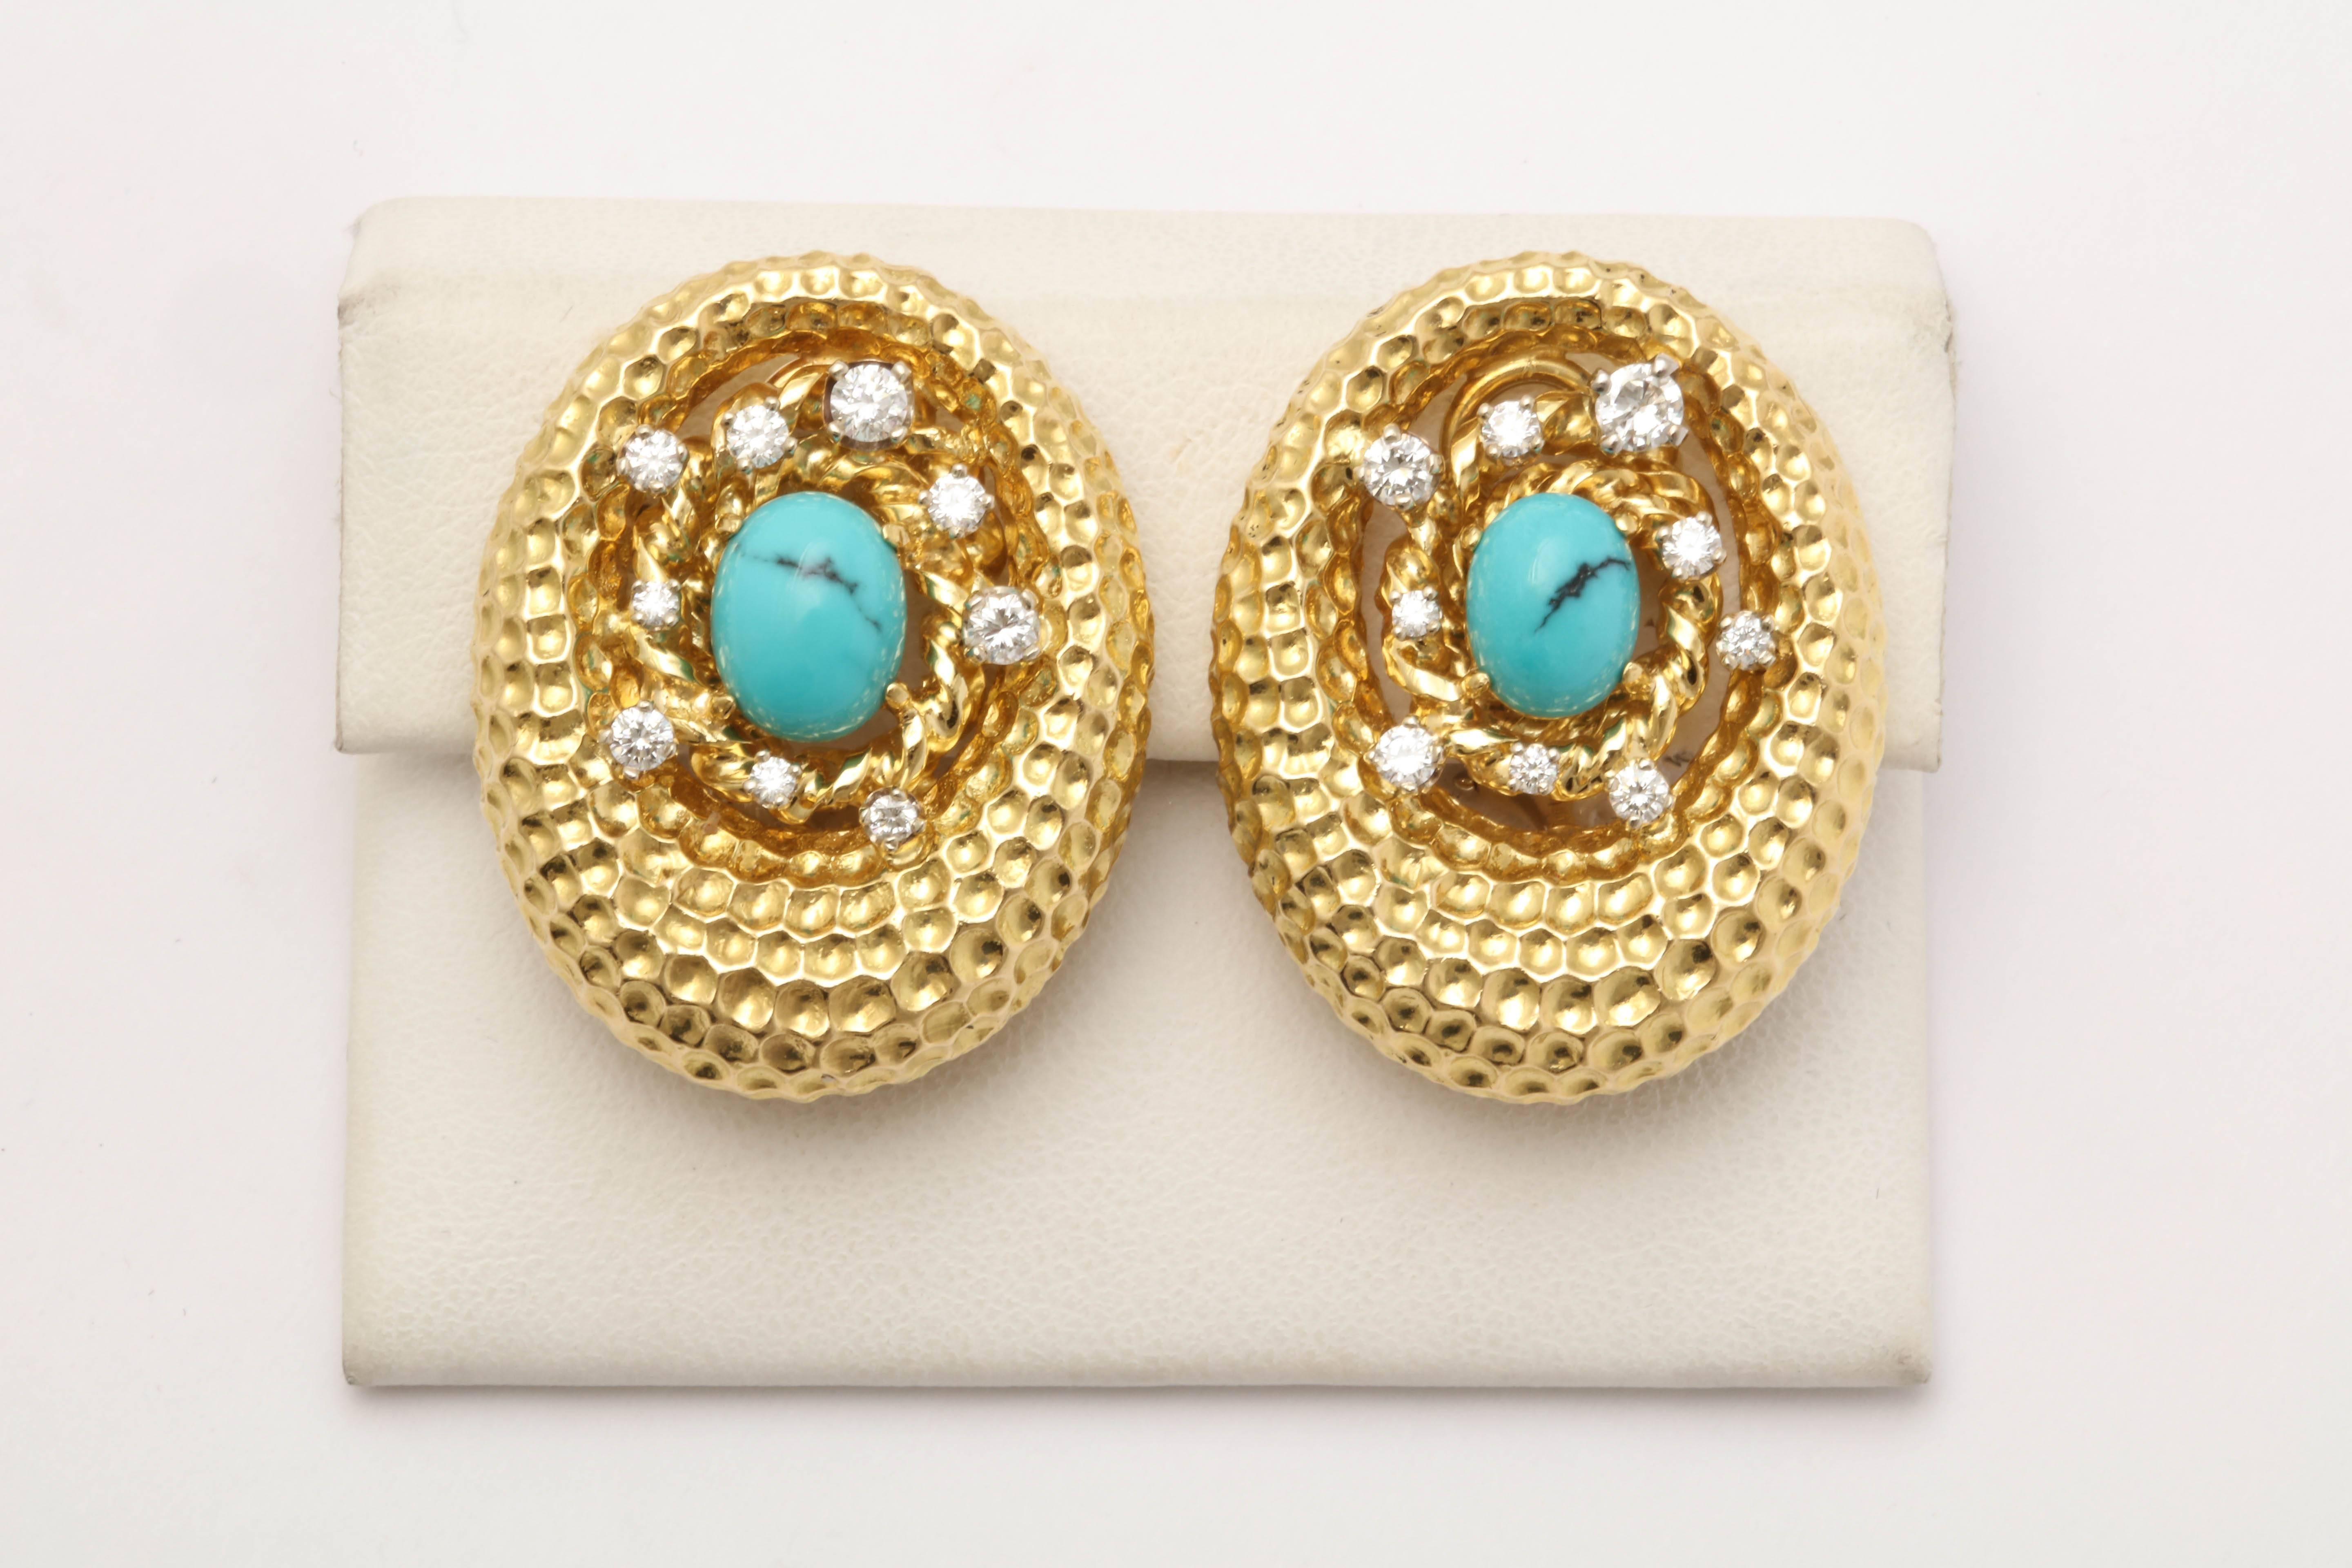 18kt Gold Oval Shaped Clip On Earrings Embellished With 18 Full Cut Diamonds Weighing Approximately 1.50 Cts Total weight. Further Designed With Two 5 Mm Oval Cut Natural Turquoises. Gold Workmanship Consisting Of Beautiful Crater Design